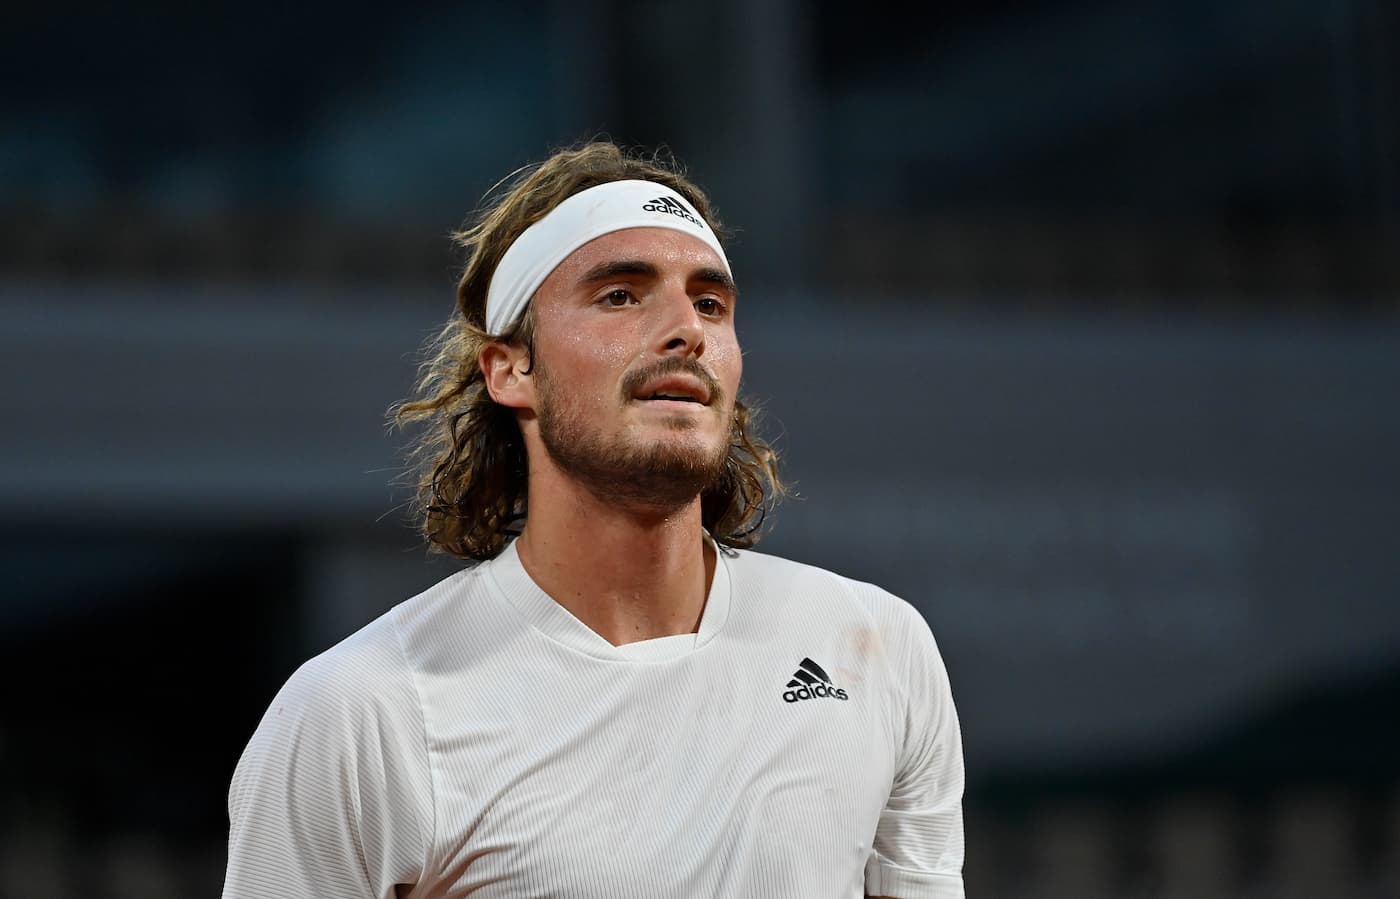 Stefanos tsitsipas on constantly improving himself on and off the court